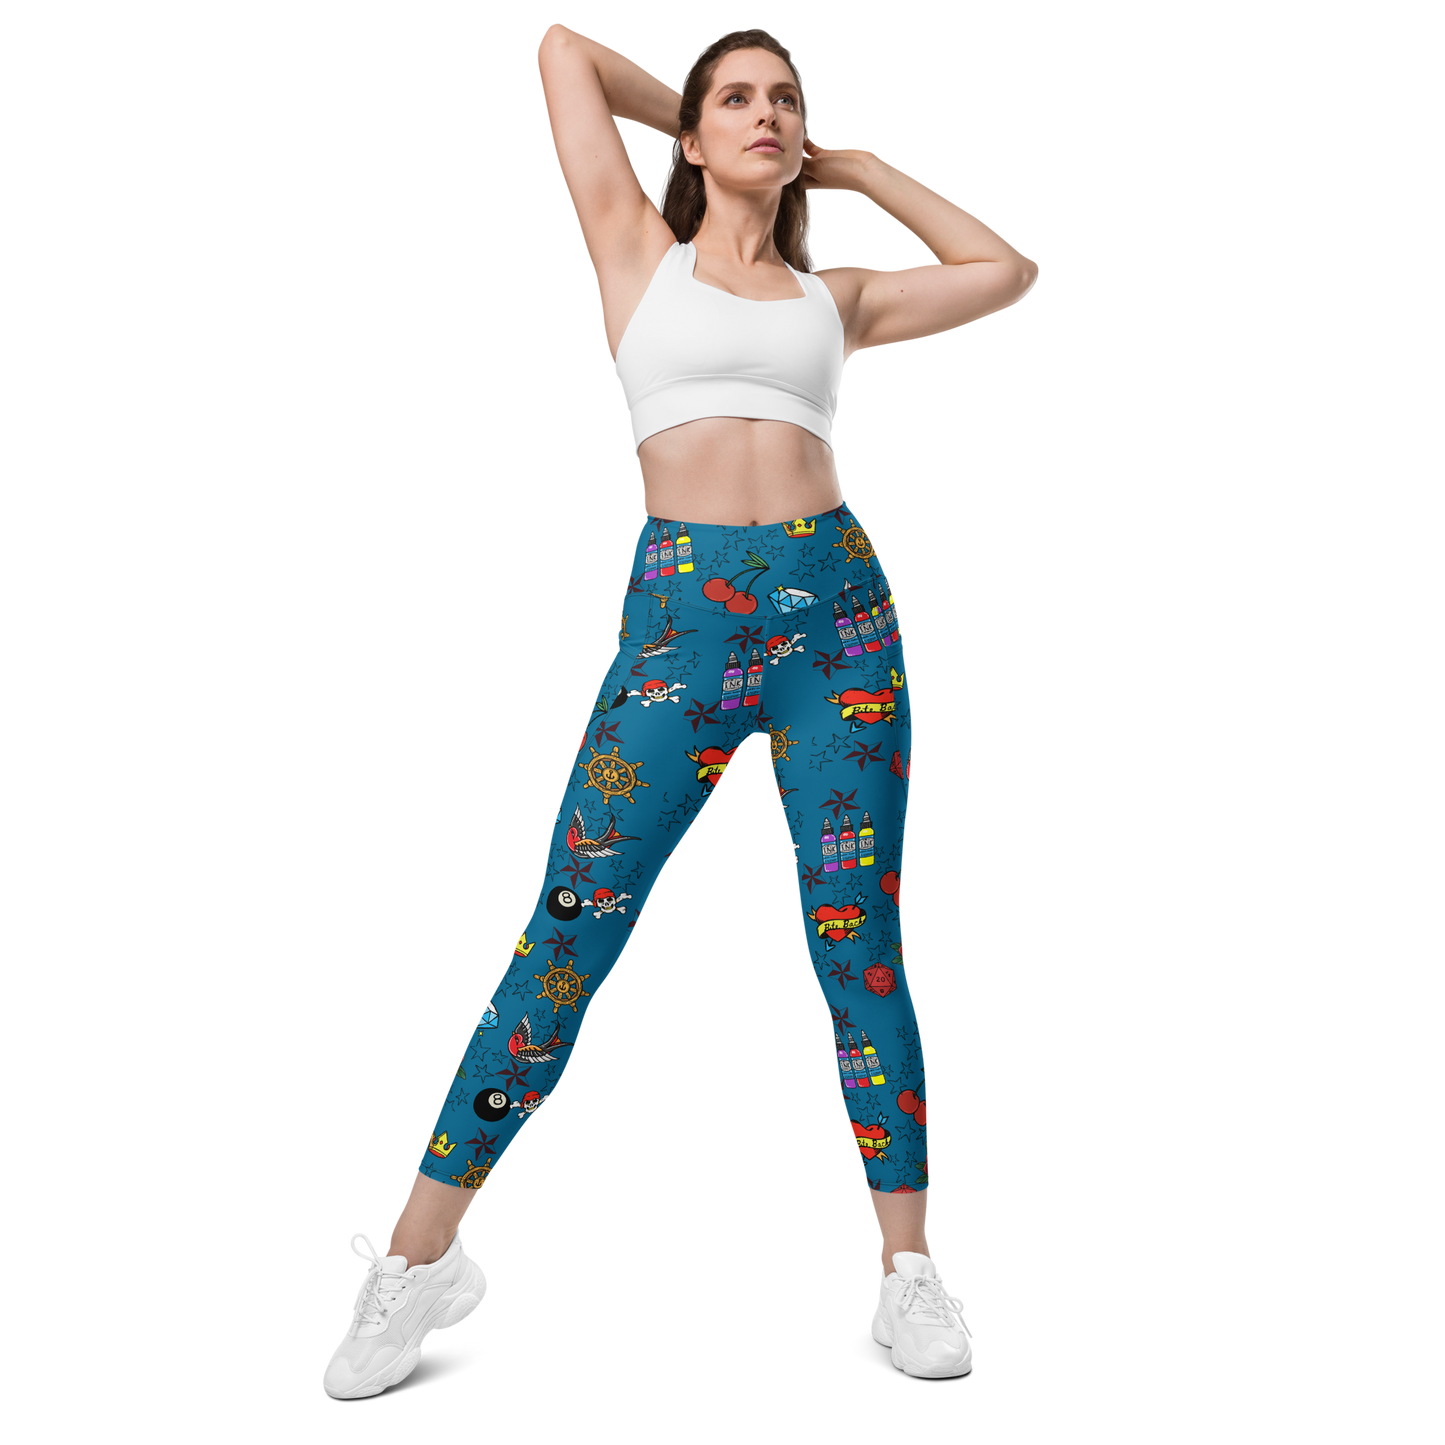 Key West Tattoo Leggings with pockets